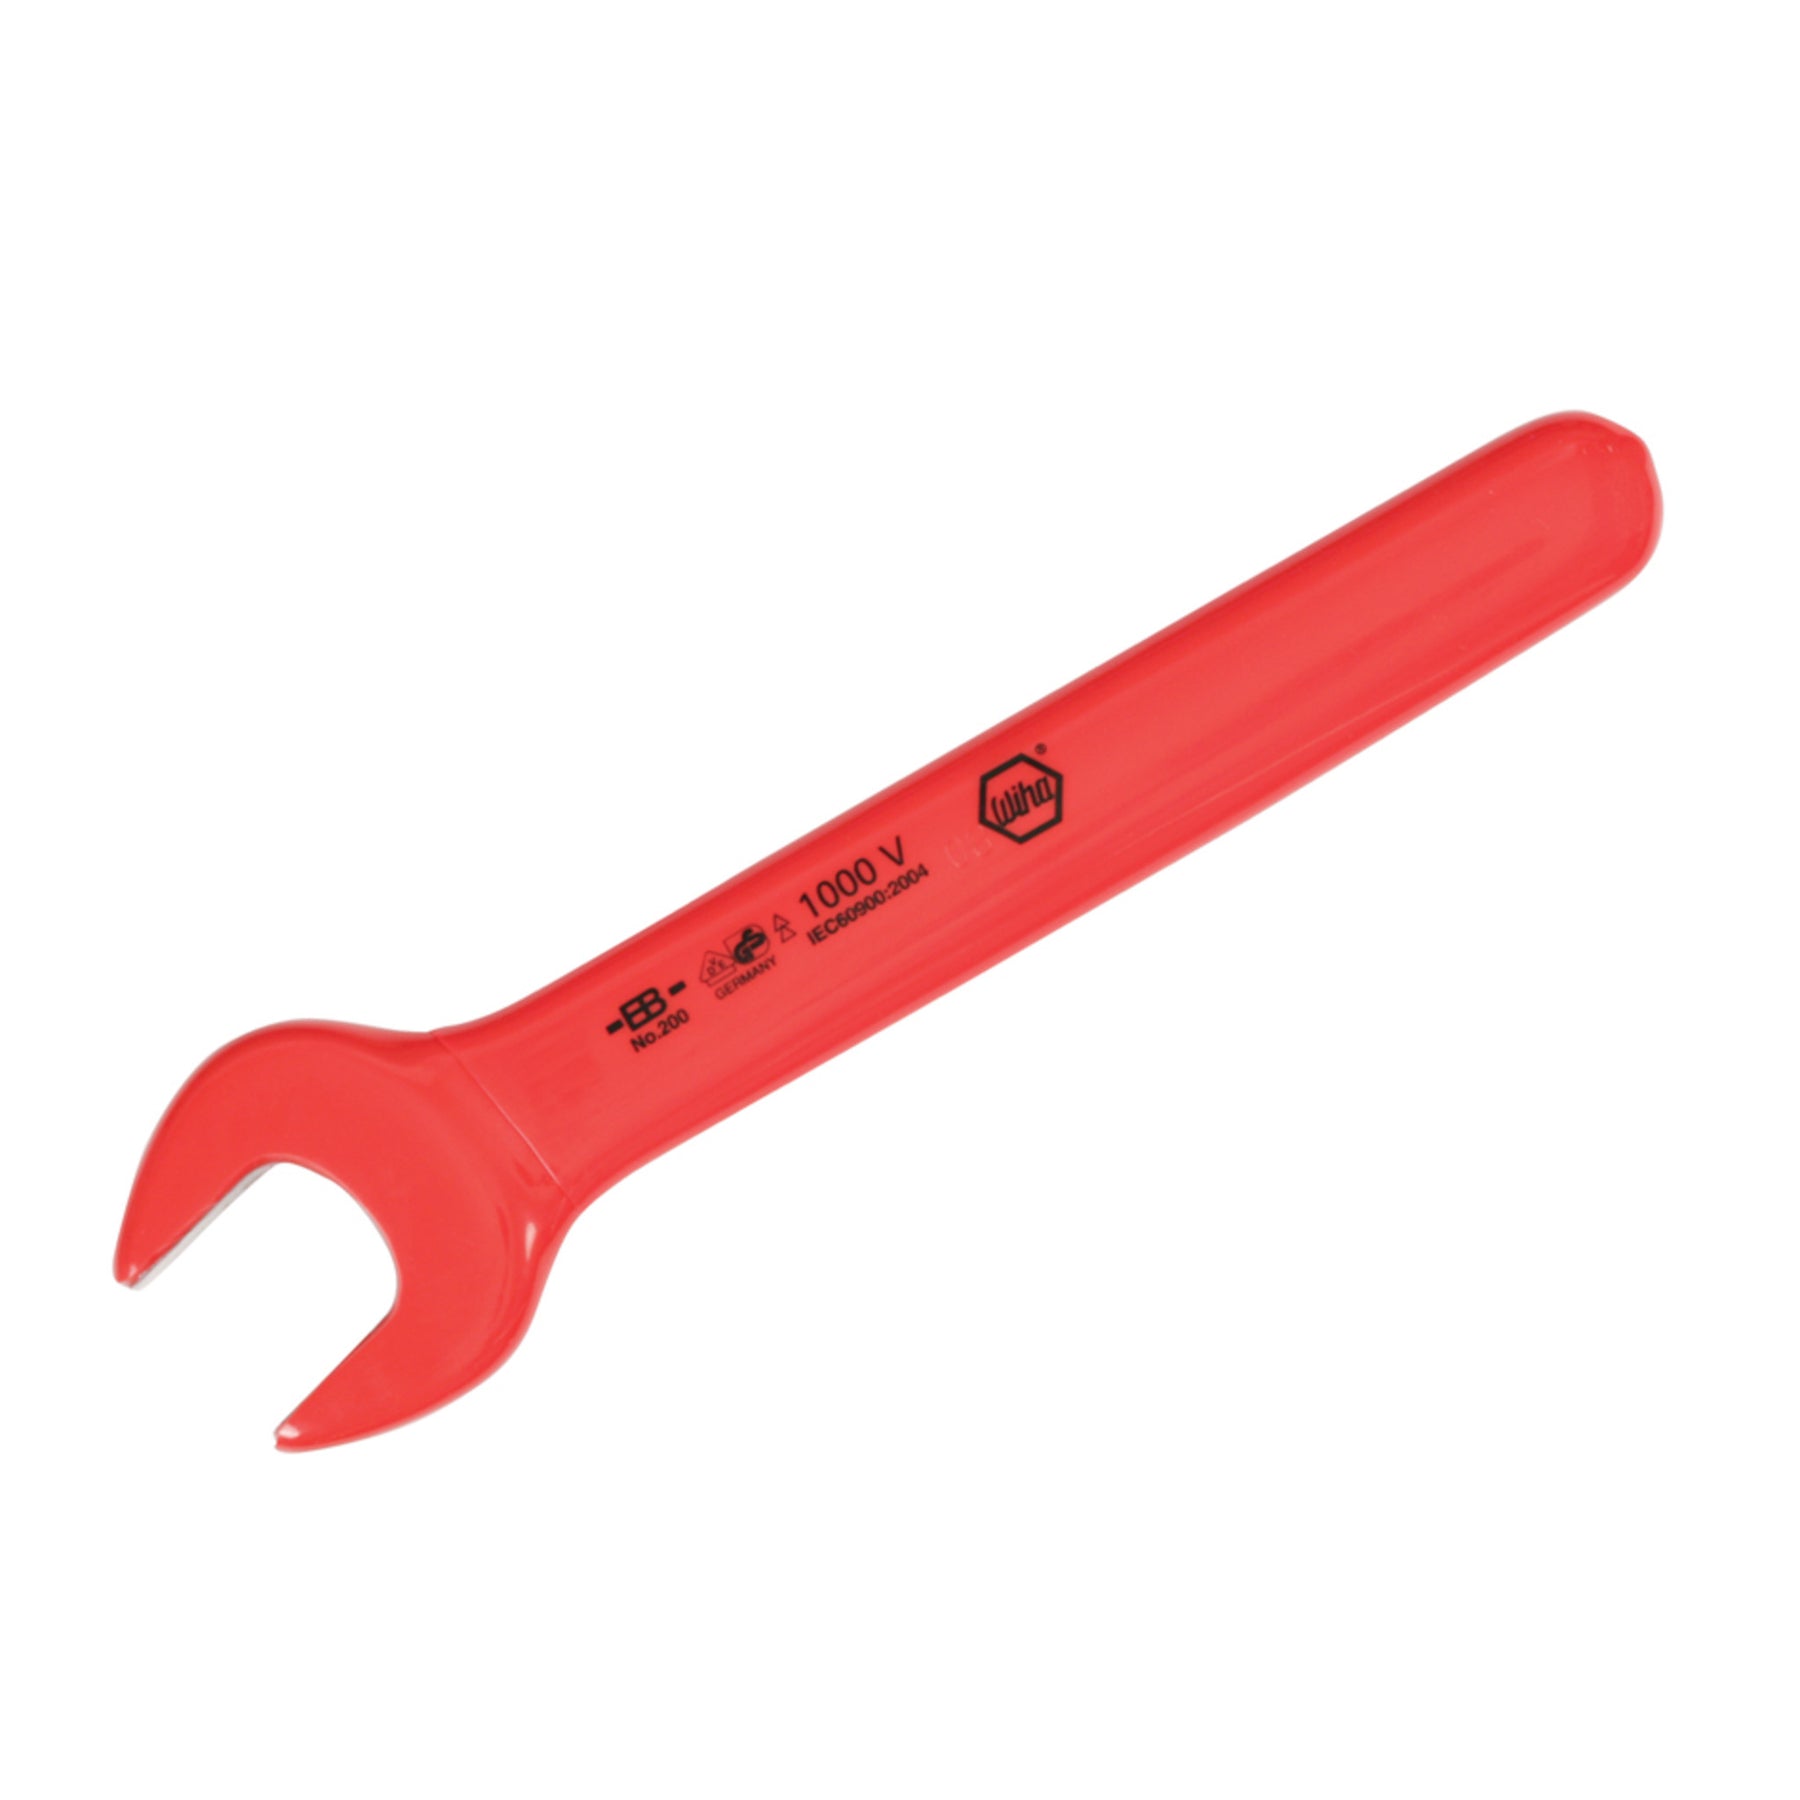 Wiha 20024 Insulated Open End Wrench 24.0mm